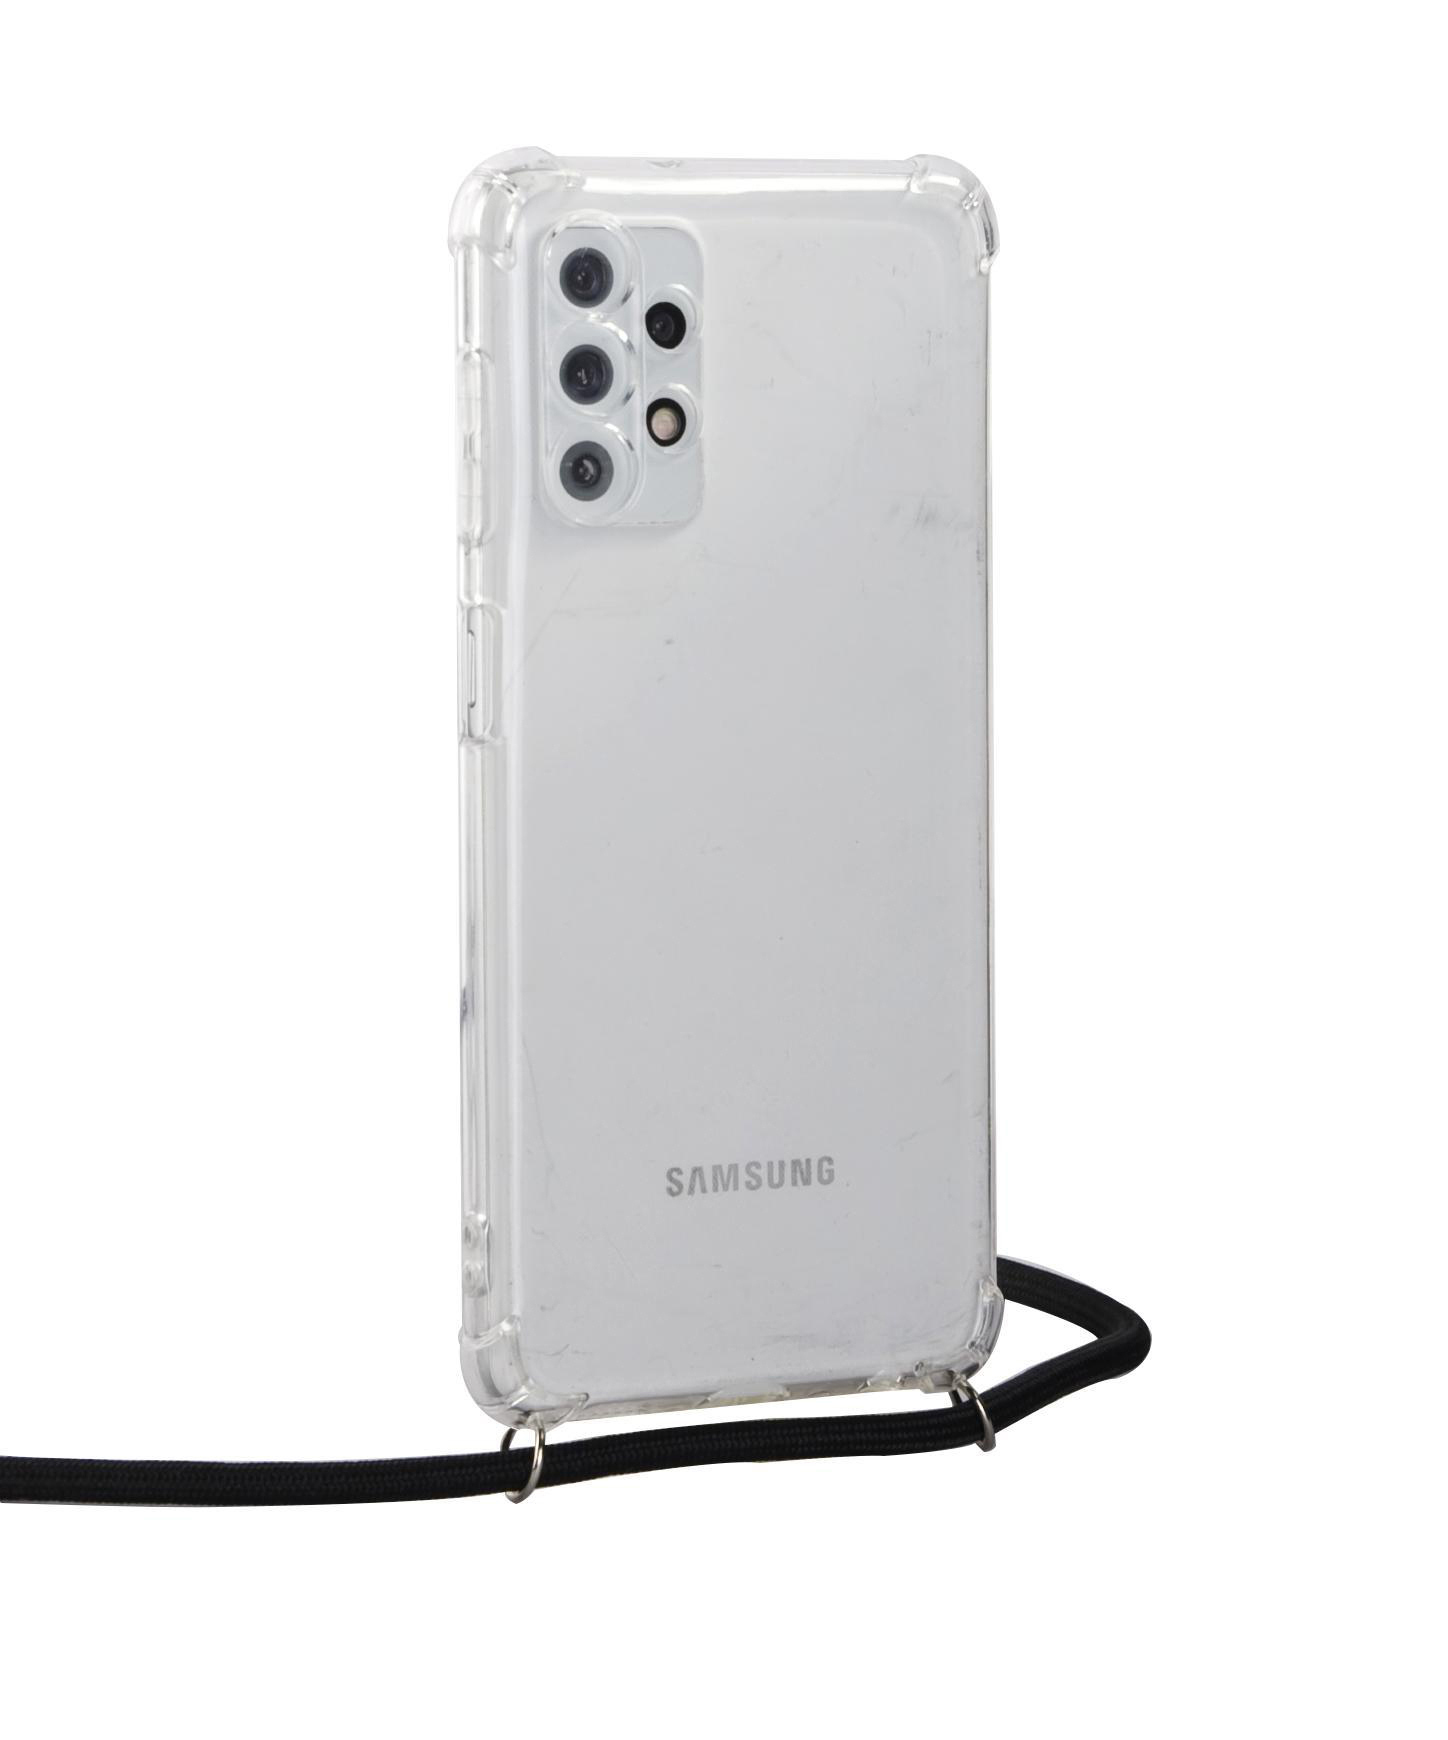 4G, Galaxy Case, ISY A13 Backcover, Transparent ISC-5306 HangOn Samsung,